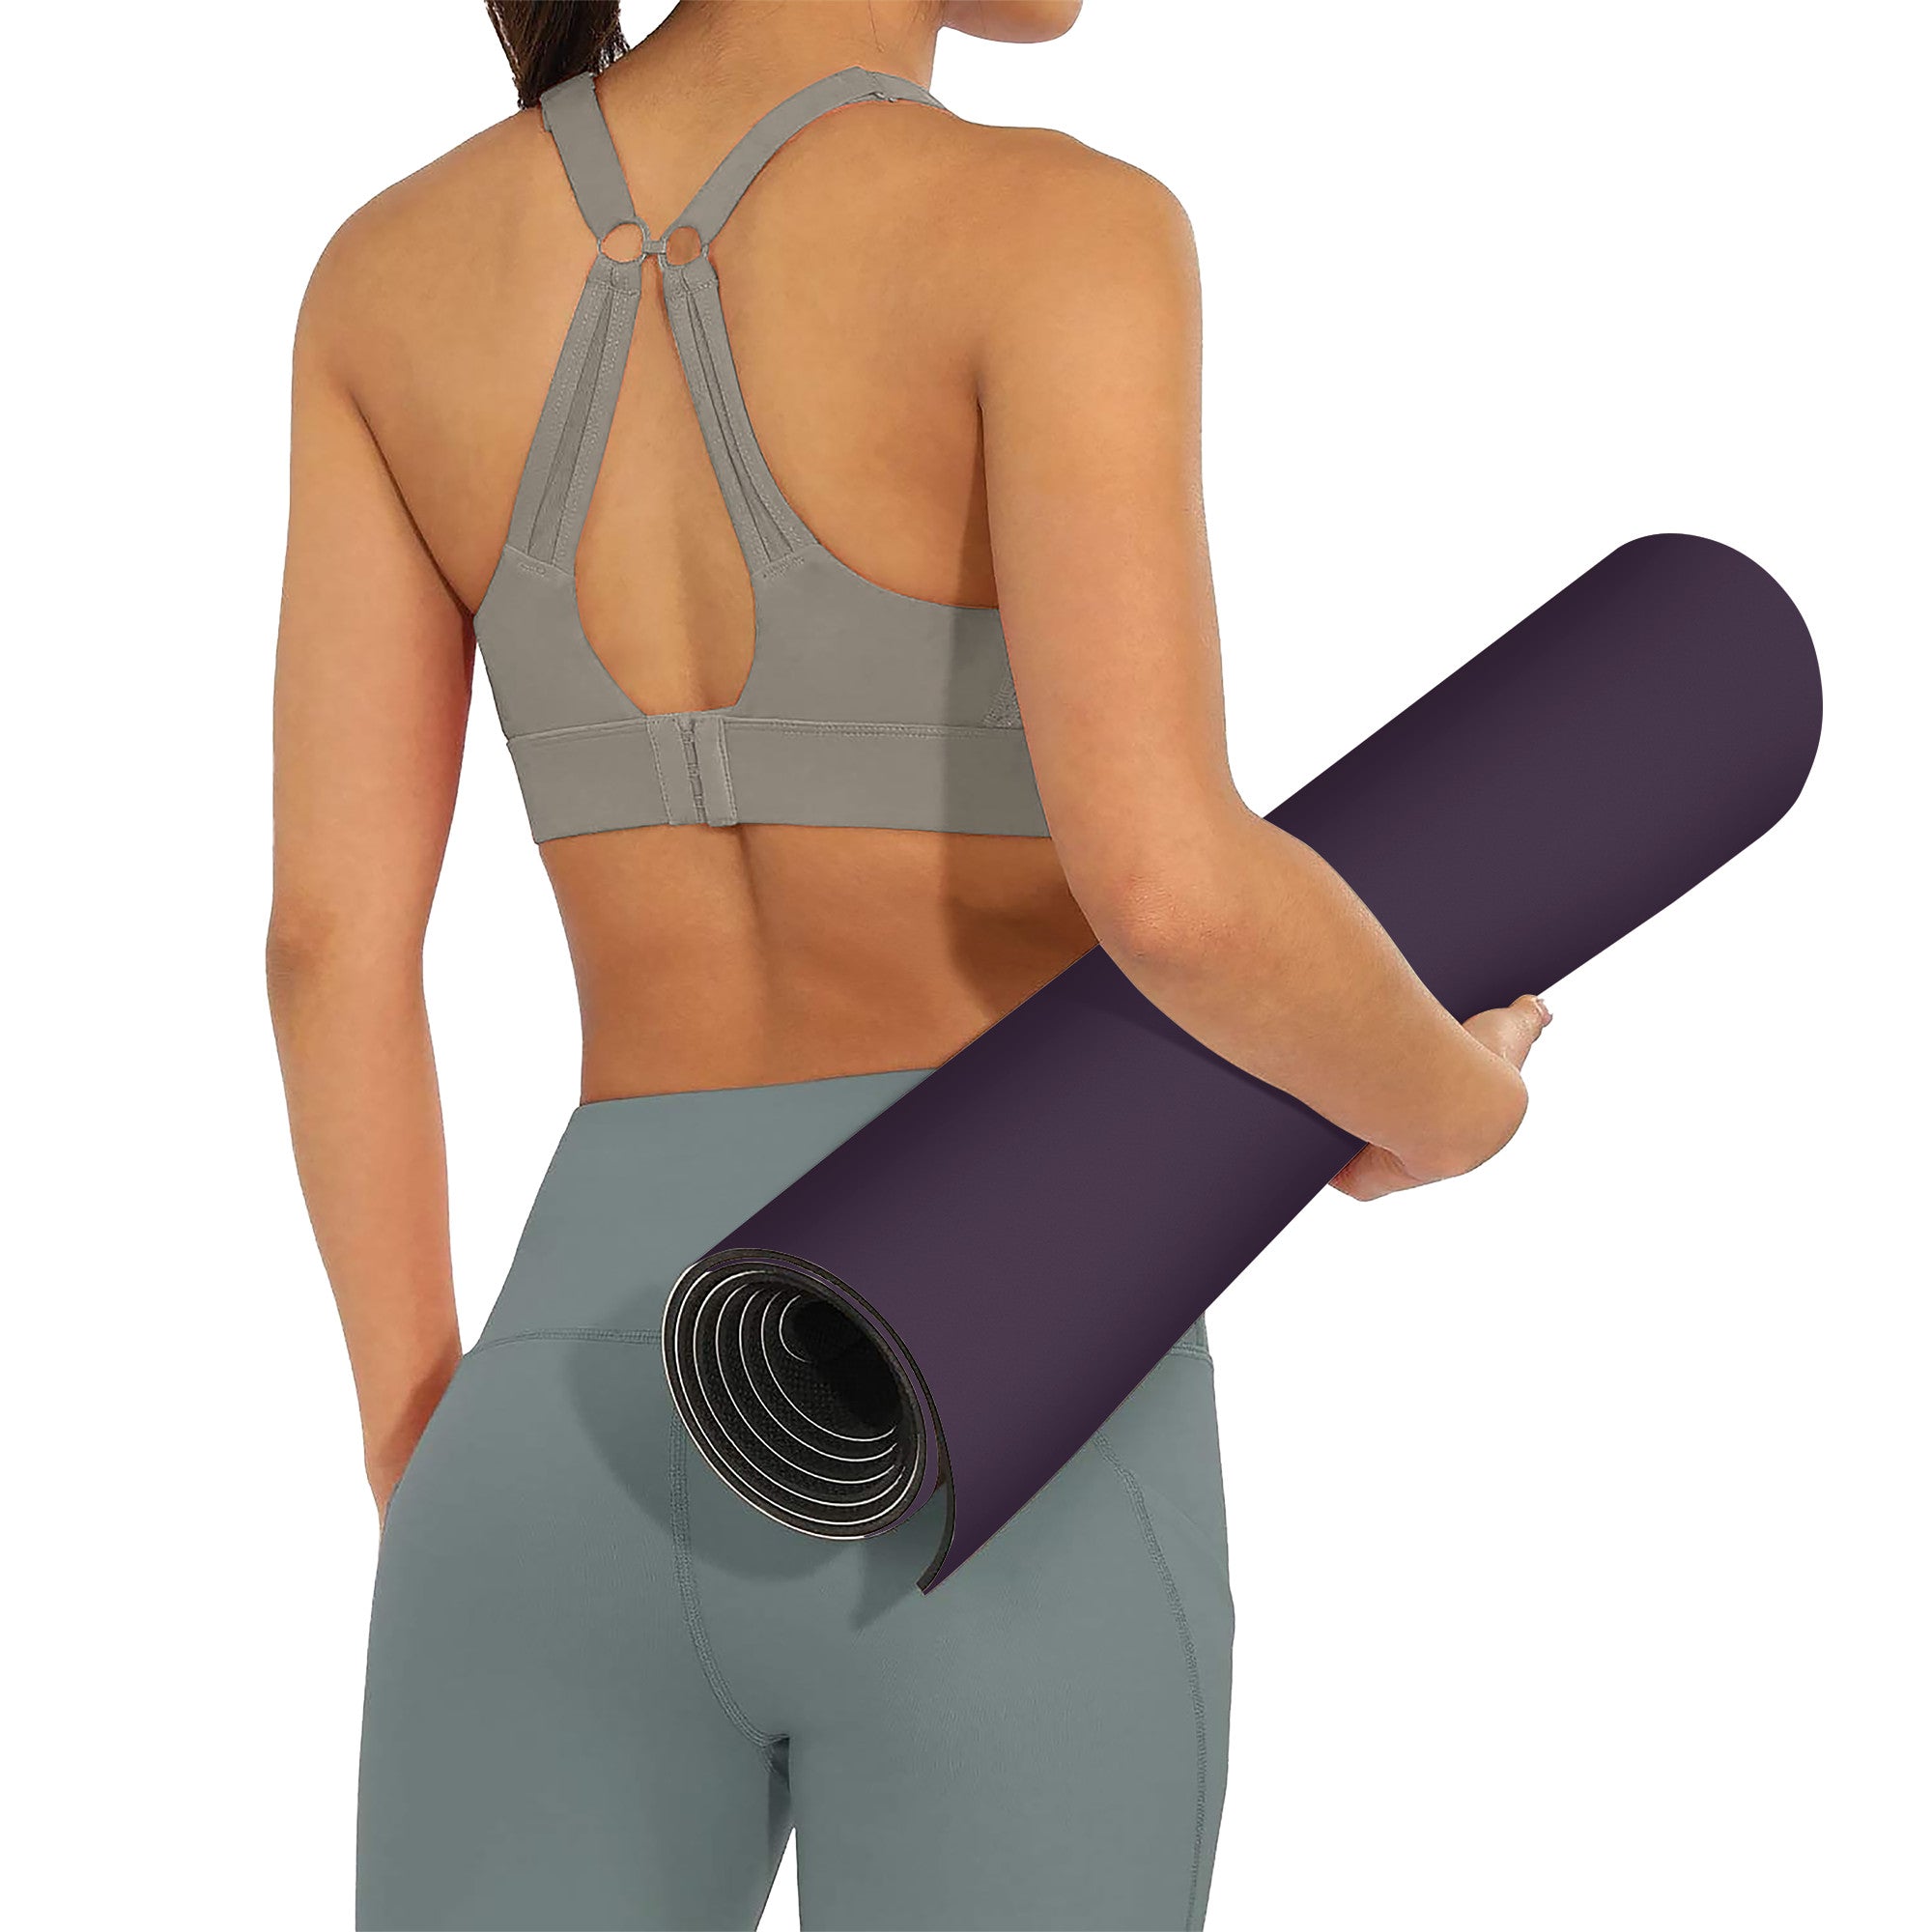 Purple Rubber Light Yoga Mat - Personal Hour for Yoga and Meditations 